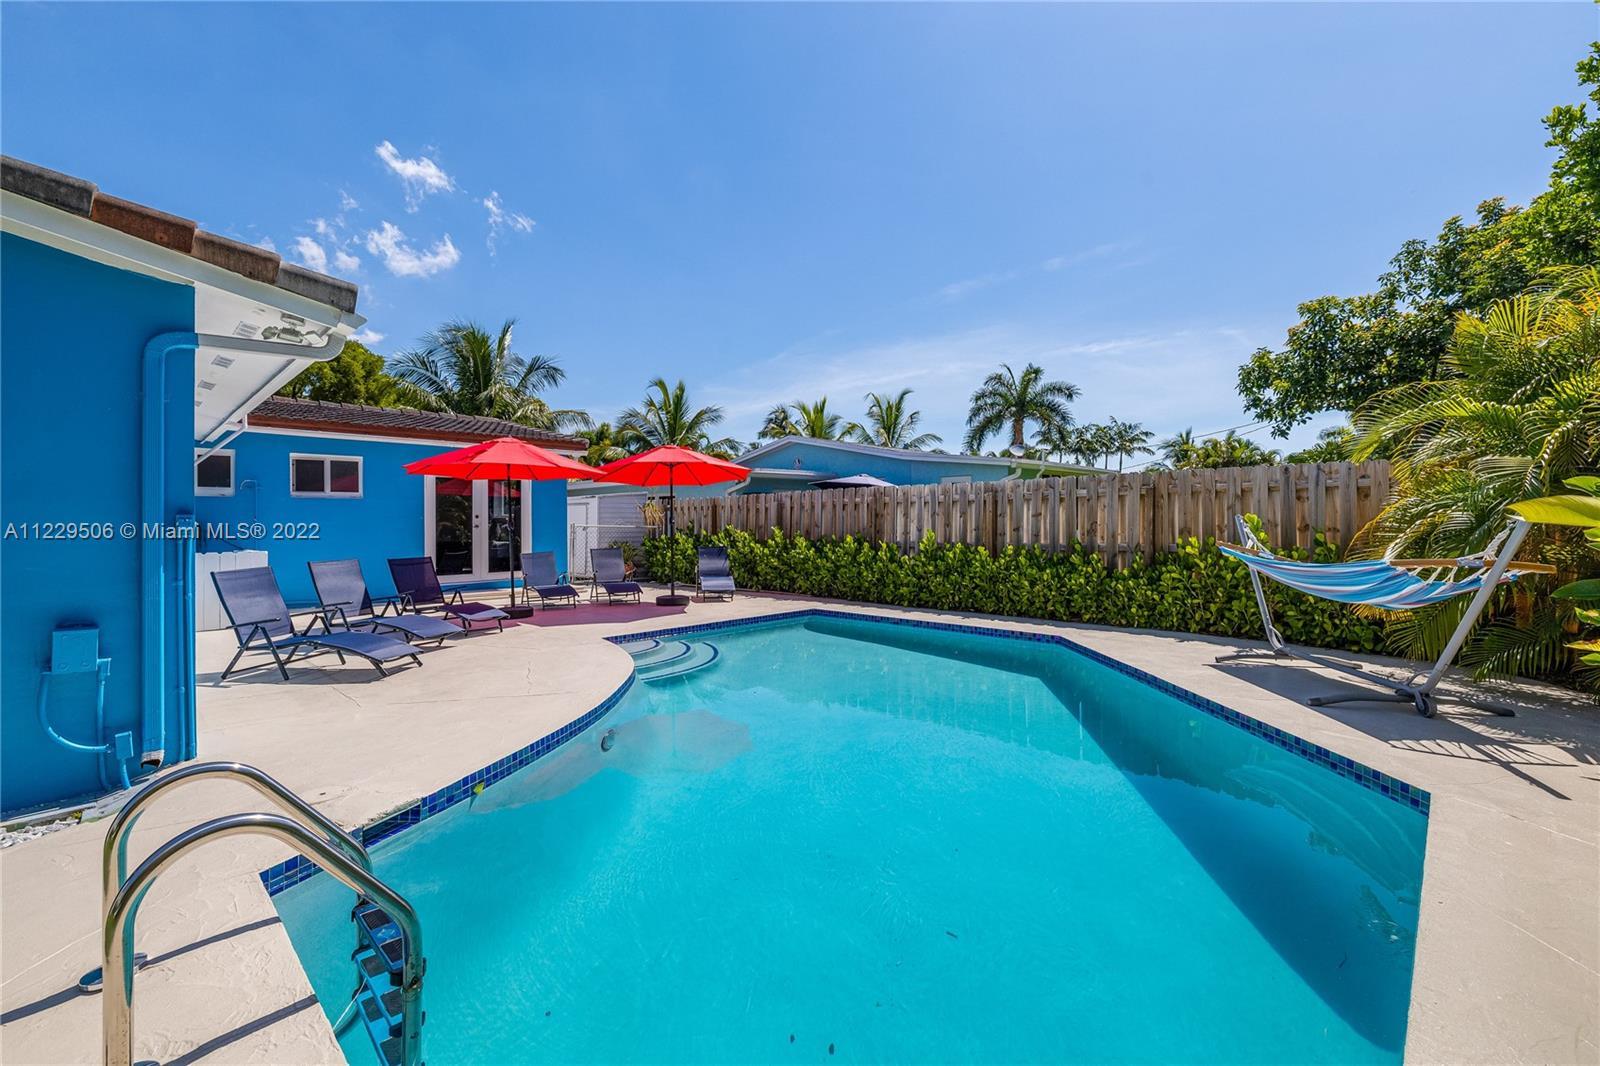 This stunning 3 bedroom, 2 bath fully furnished home located in the heart of Wilton Manors provides 